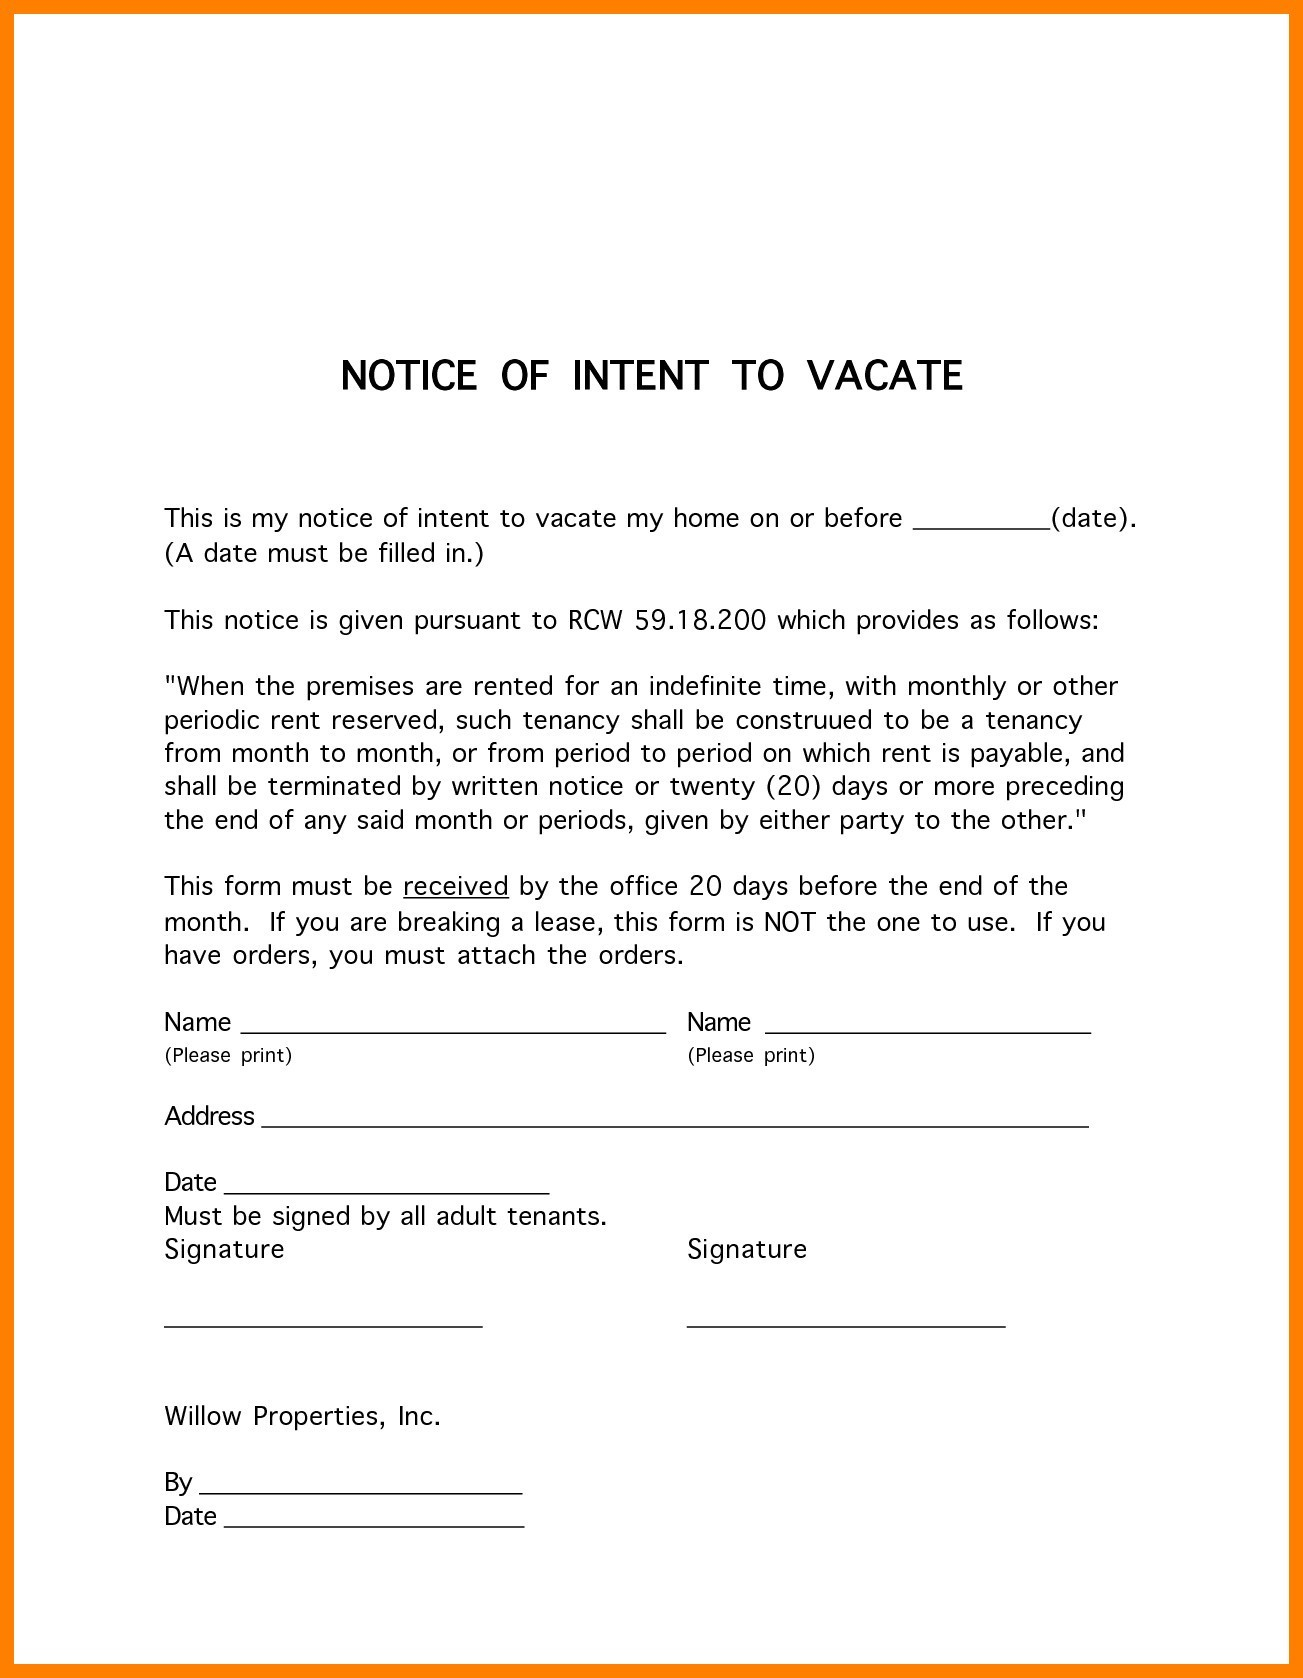 Tenant Warning Letter Template - Template Letter to Leave Property Best Notice to Vacate Apartment